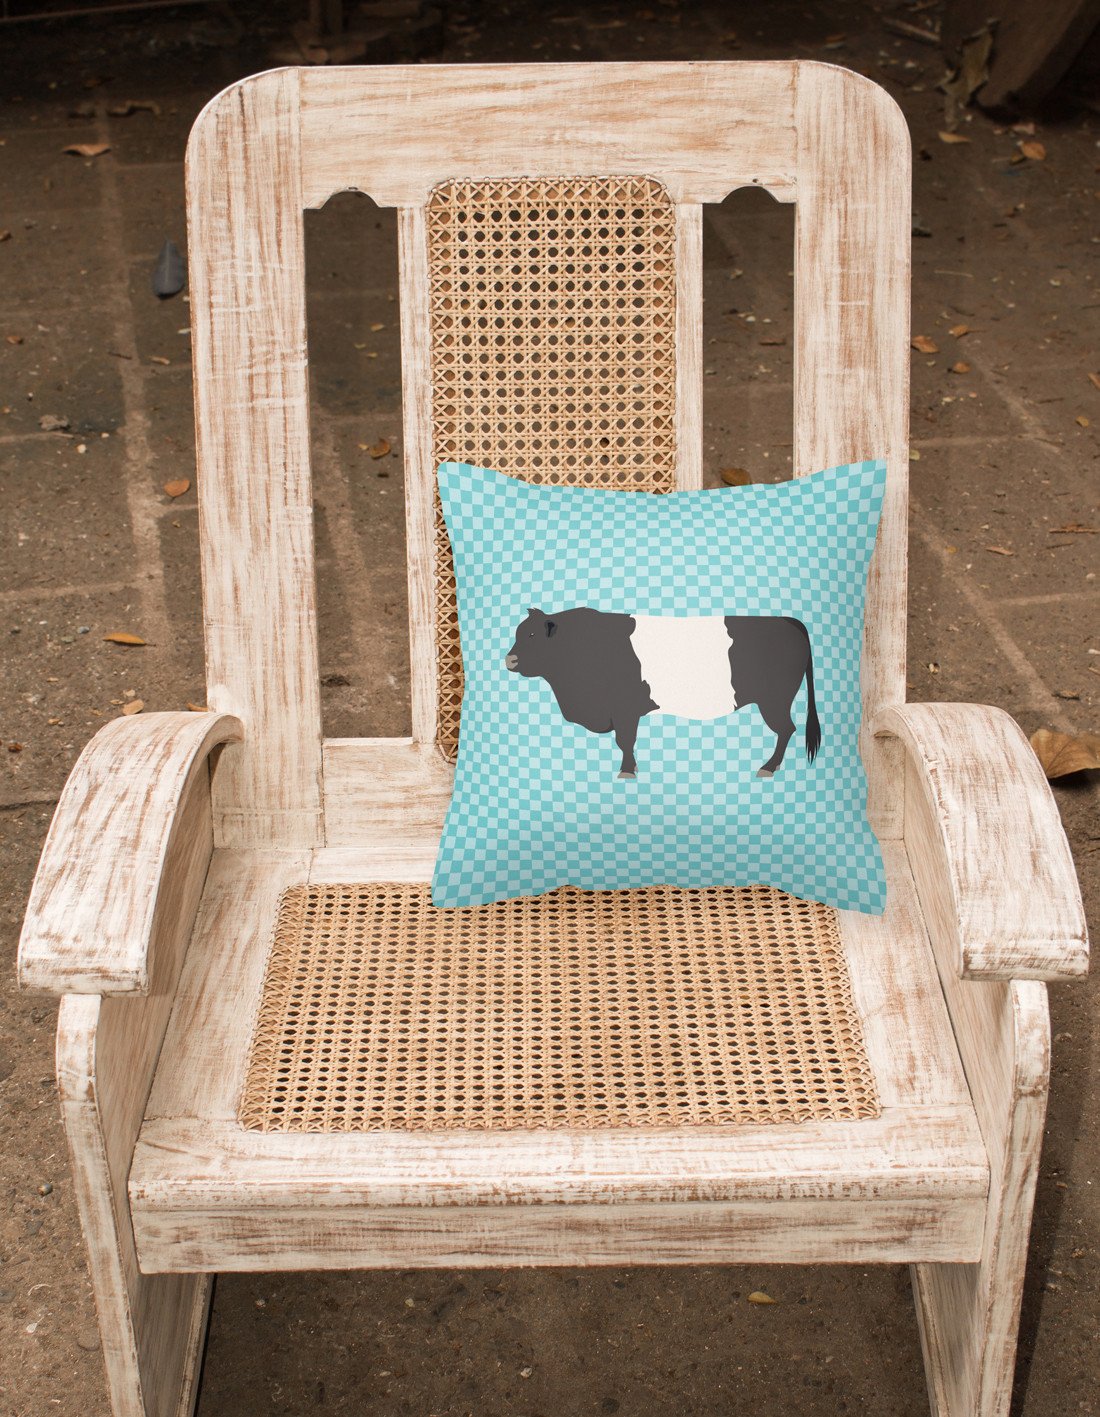 Belted Galloway Cow Blue Check Fabric Decorative Pillow BB8005PW1818 by Caroline's Treasures